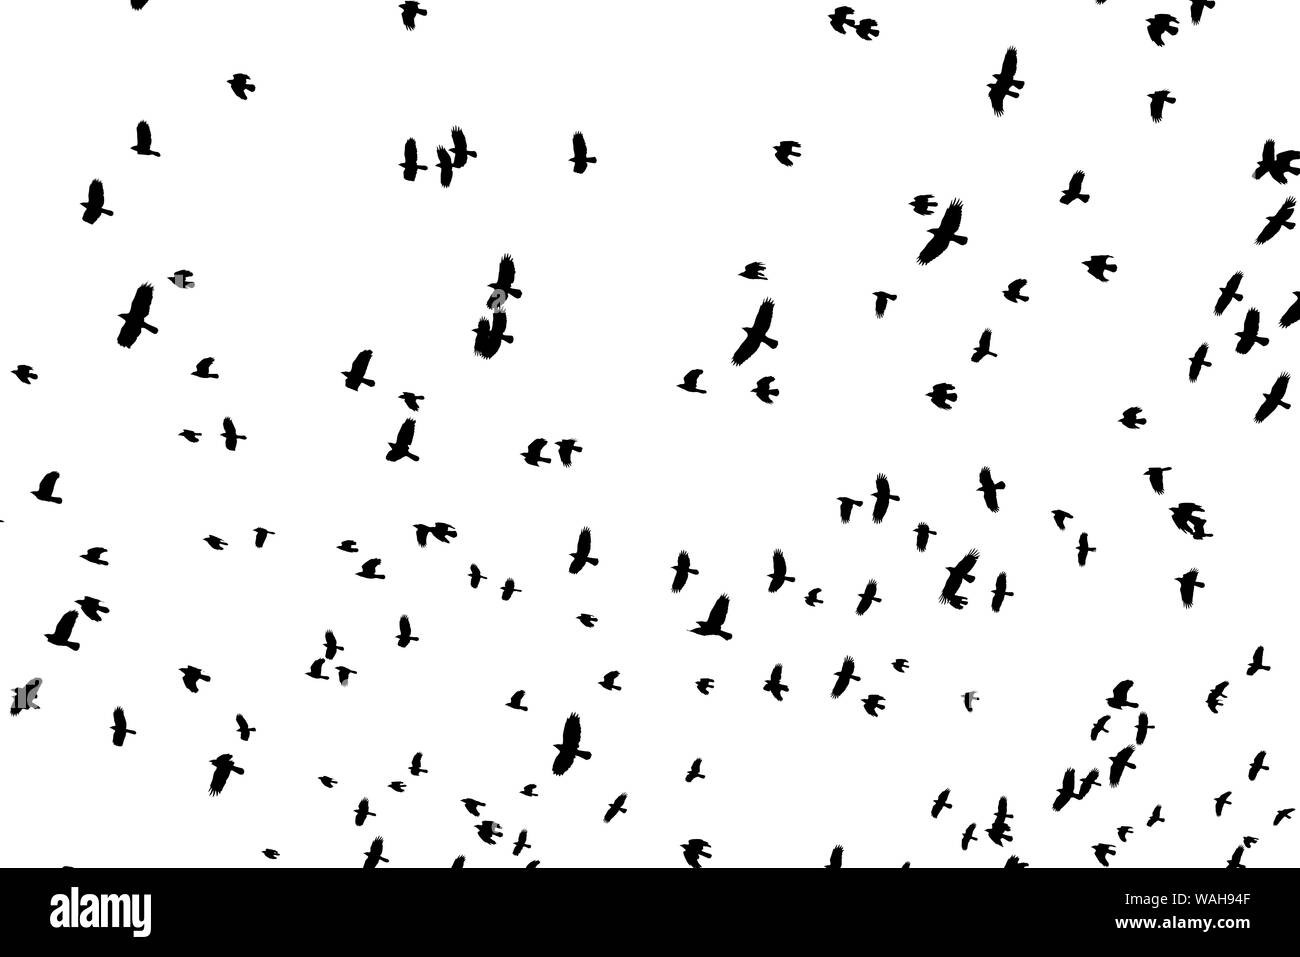 Flock of black bird shapes flying silhouetted against white background. Stock Photo